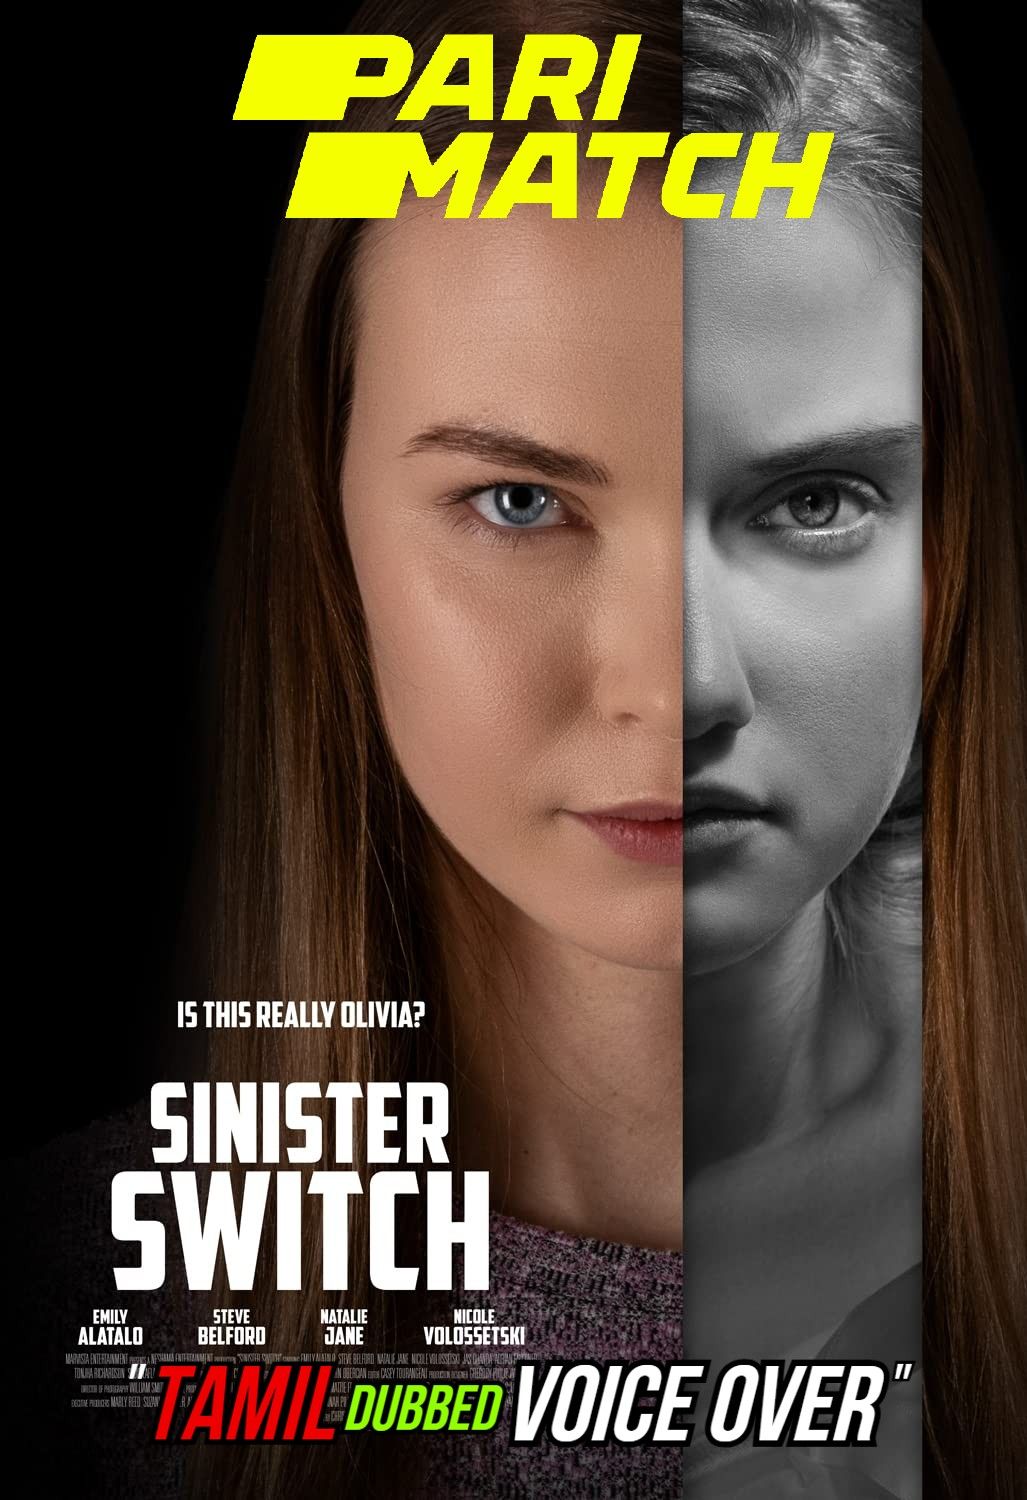 Sinister Switch (2021) Tamil (Voice Over) Dubbed HDTV download full movie